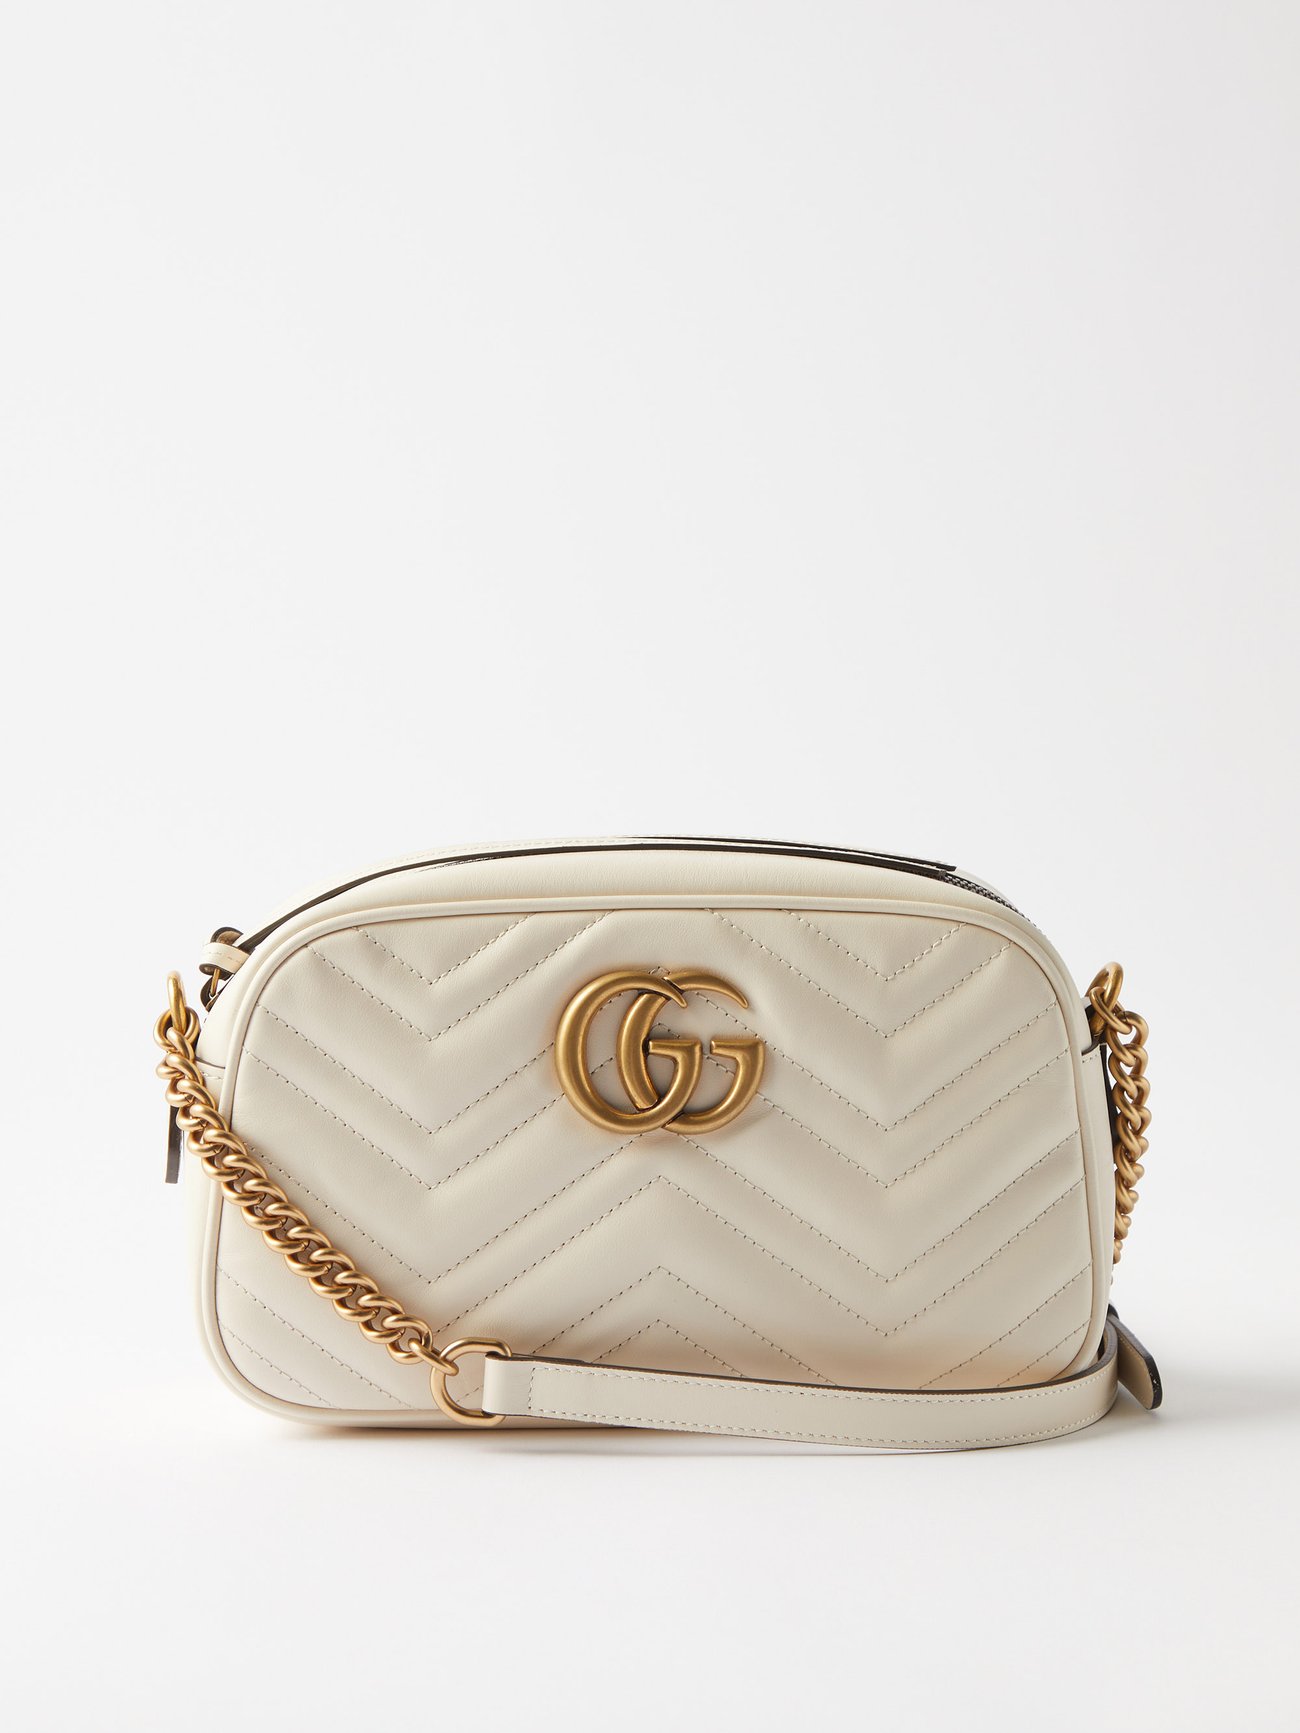 GG Marmont Small leather shoulder bag in white - Gucci | Mytheresa